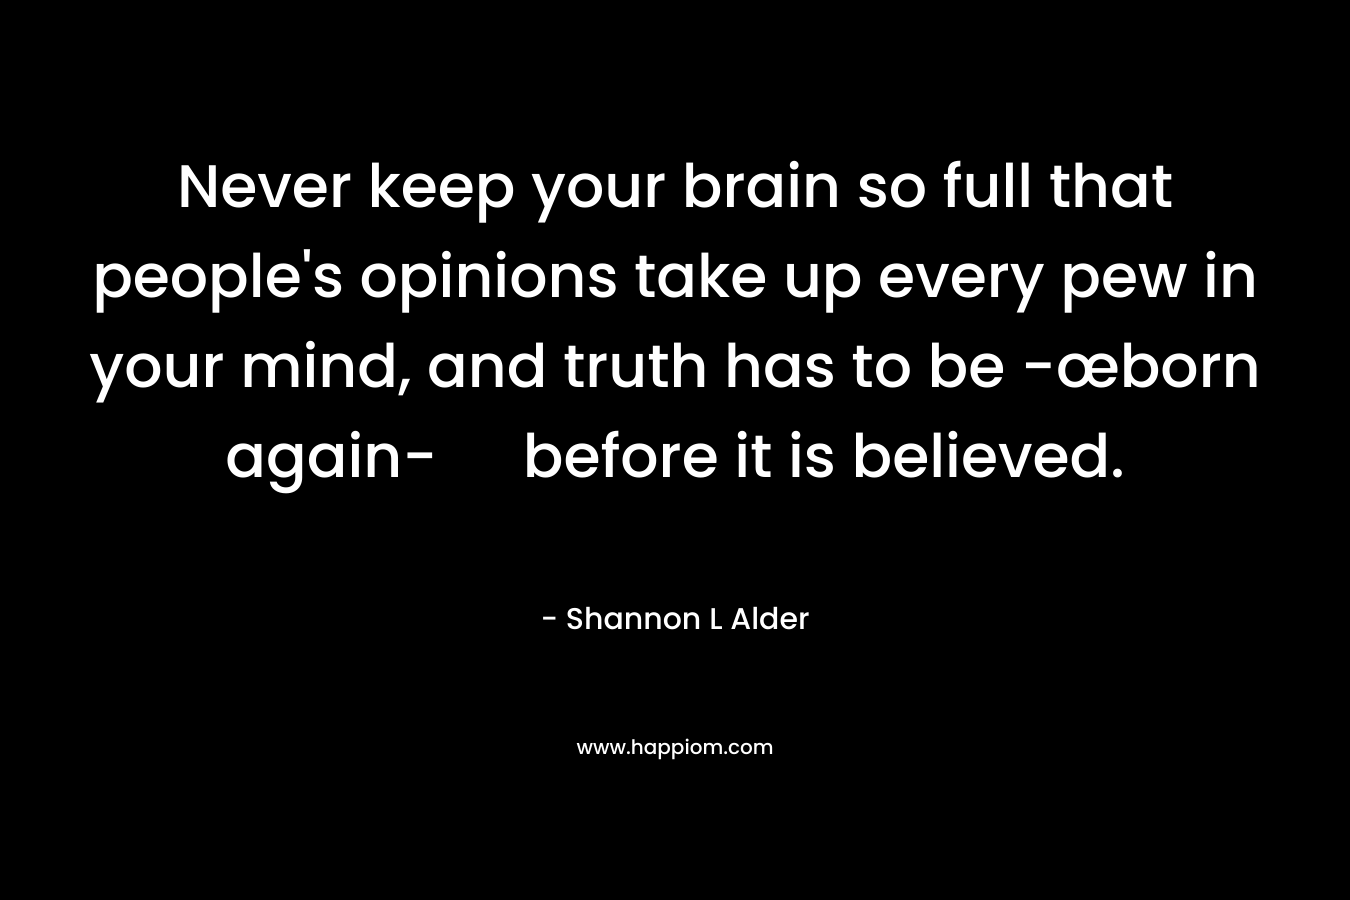 Never keep your brain so full that people's opinions take up every pew in your mind, and truth has to be -œborn again- before it is believed.